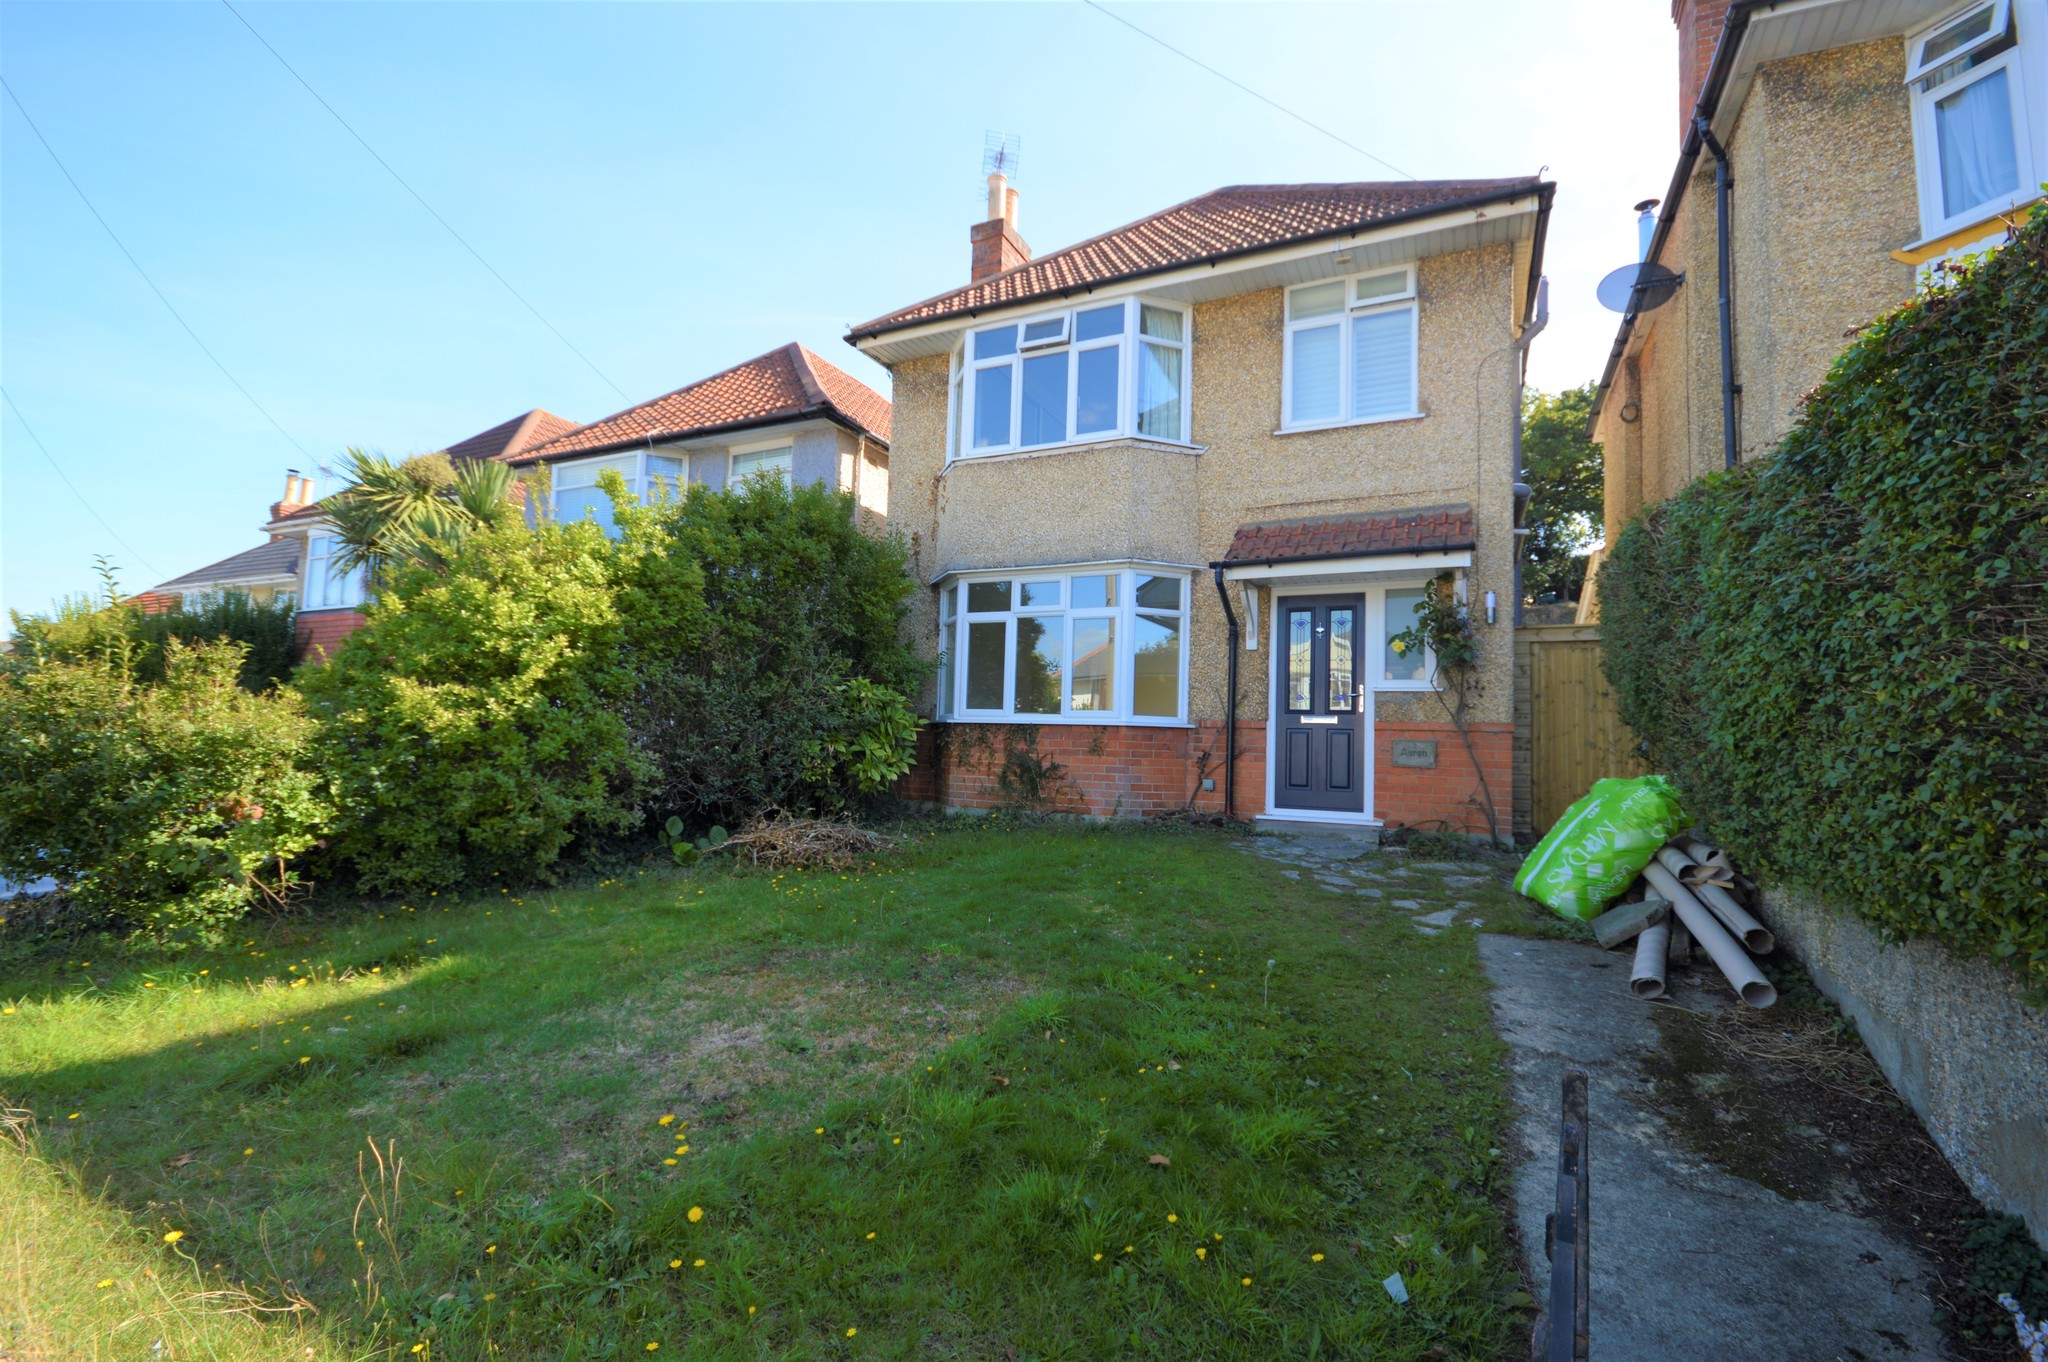 3 bed detached house to rent in Wroxham Road, Poole - Property Image 1